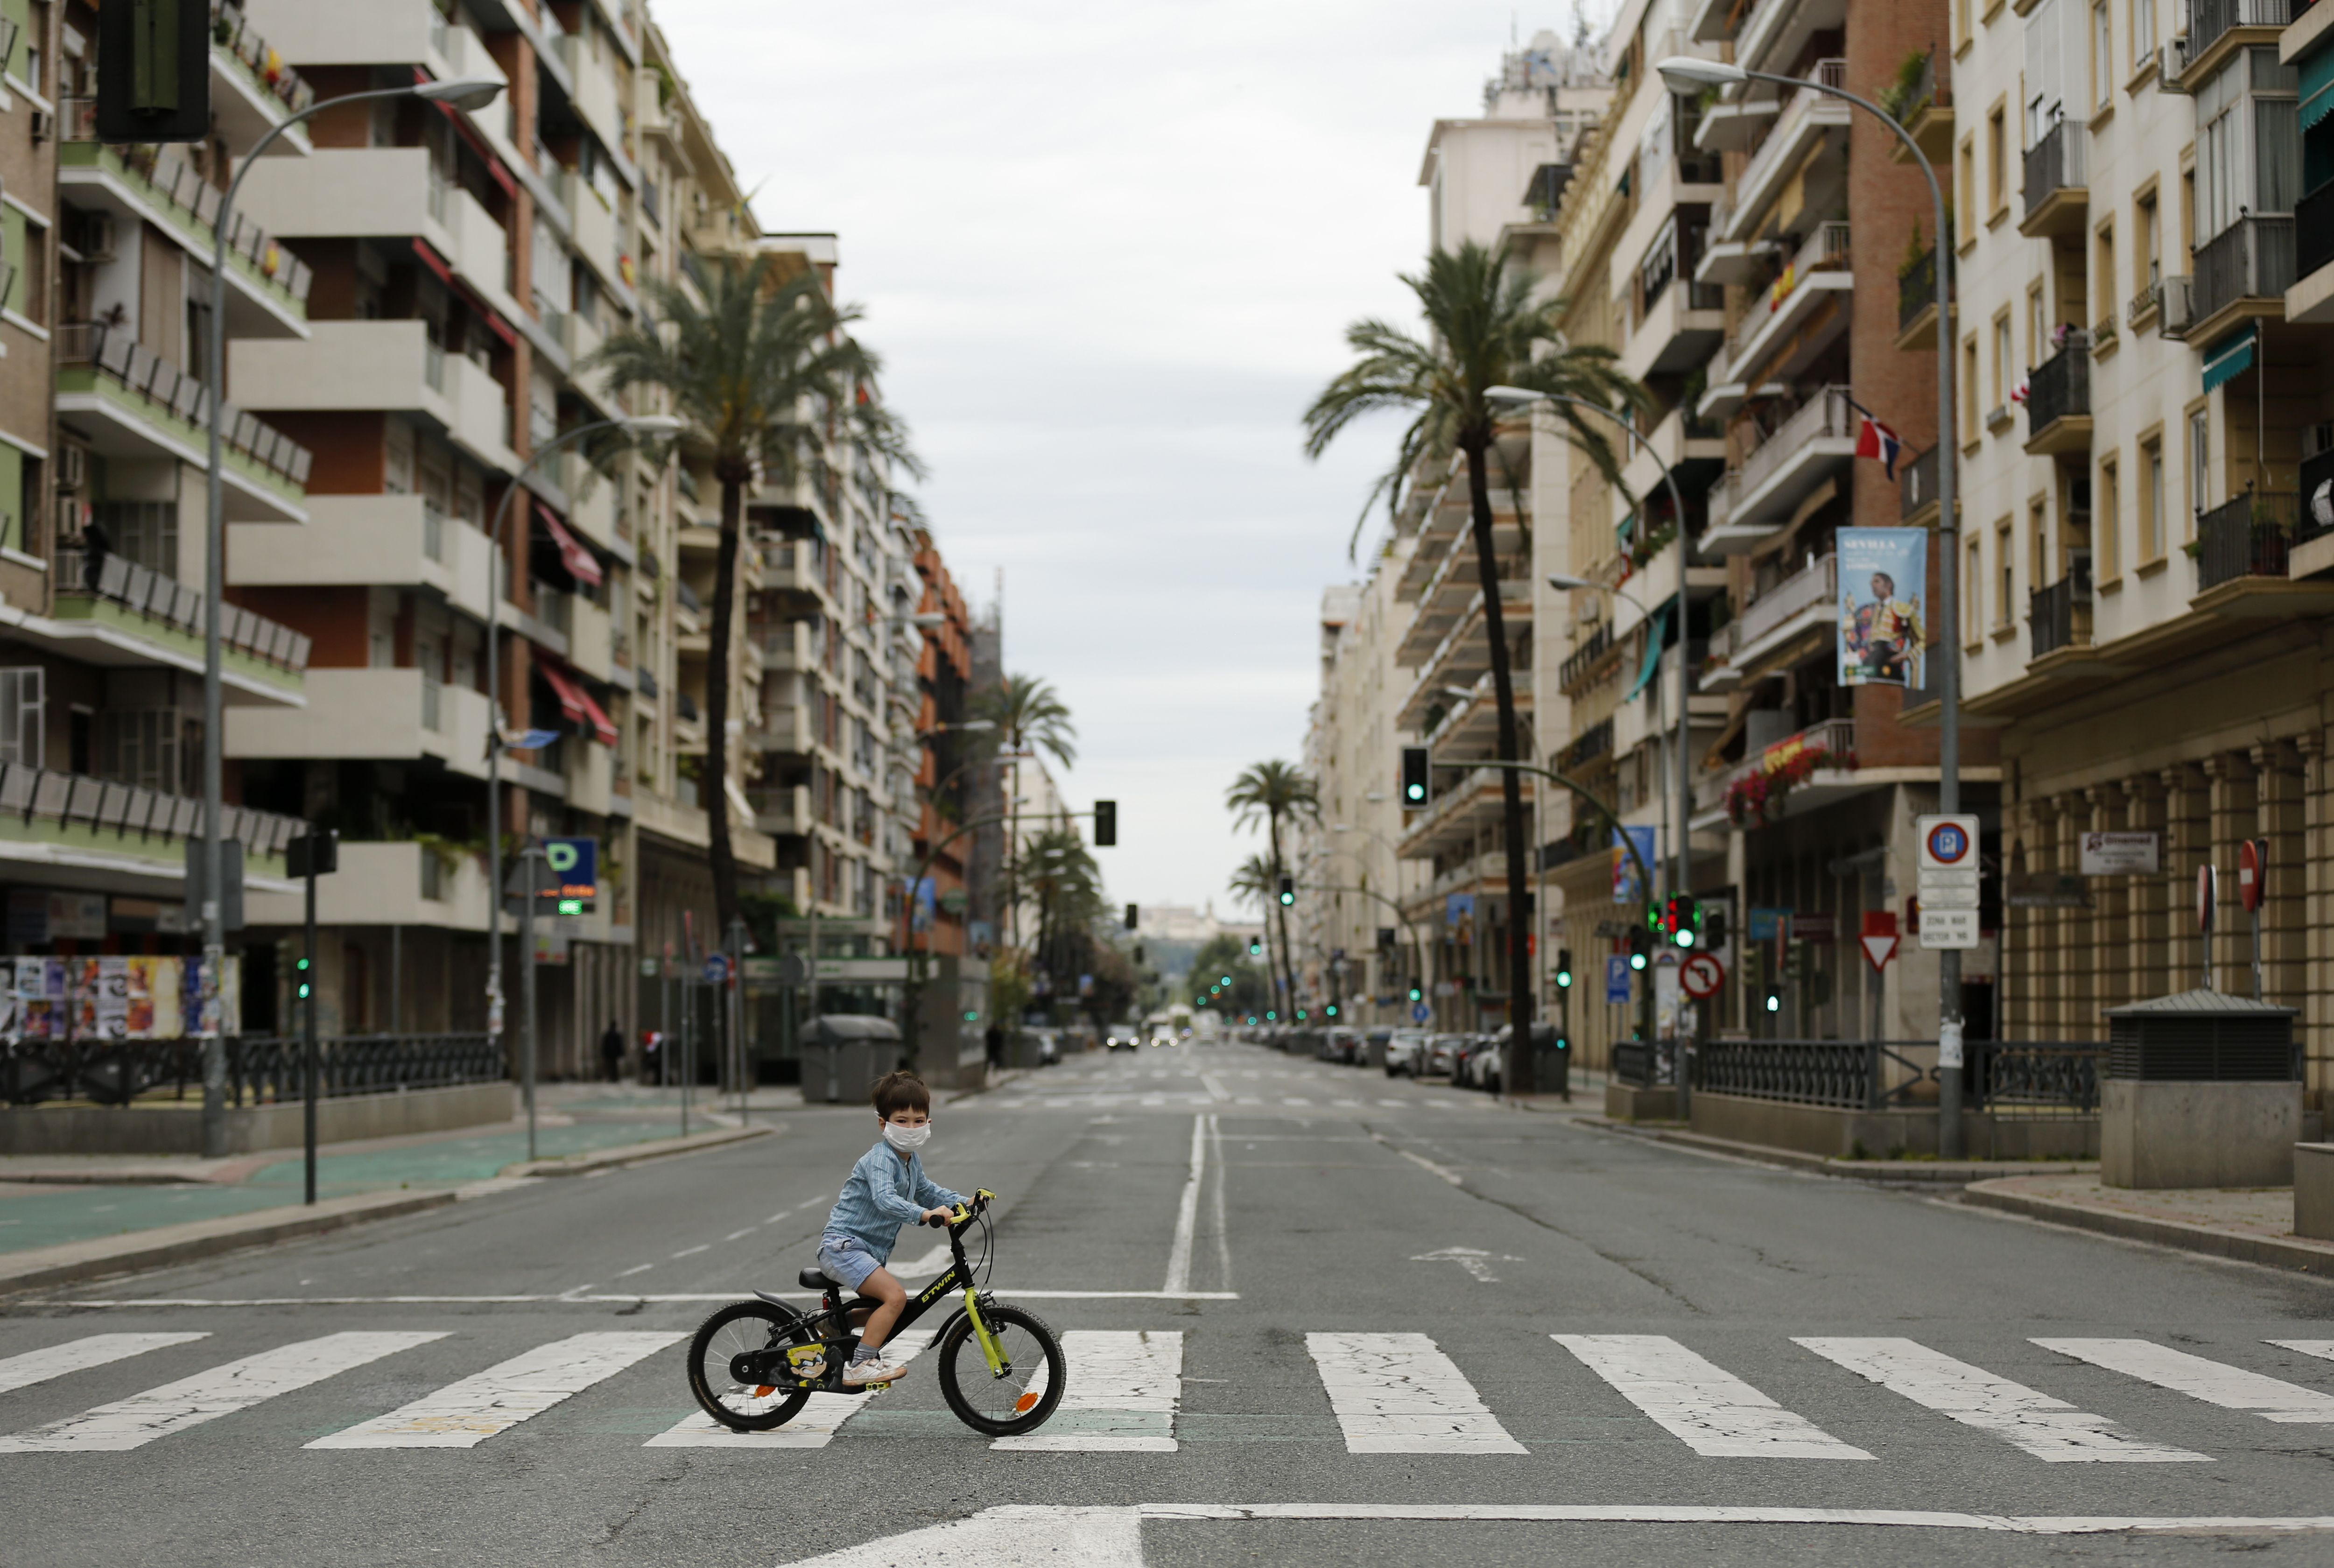 In this image, a boy rides his bicycle across an empty street